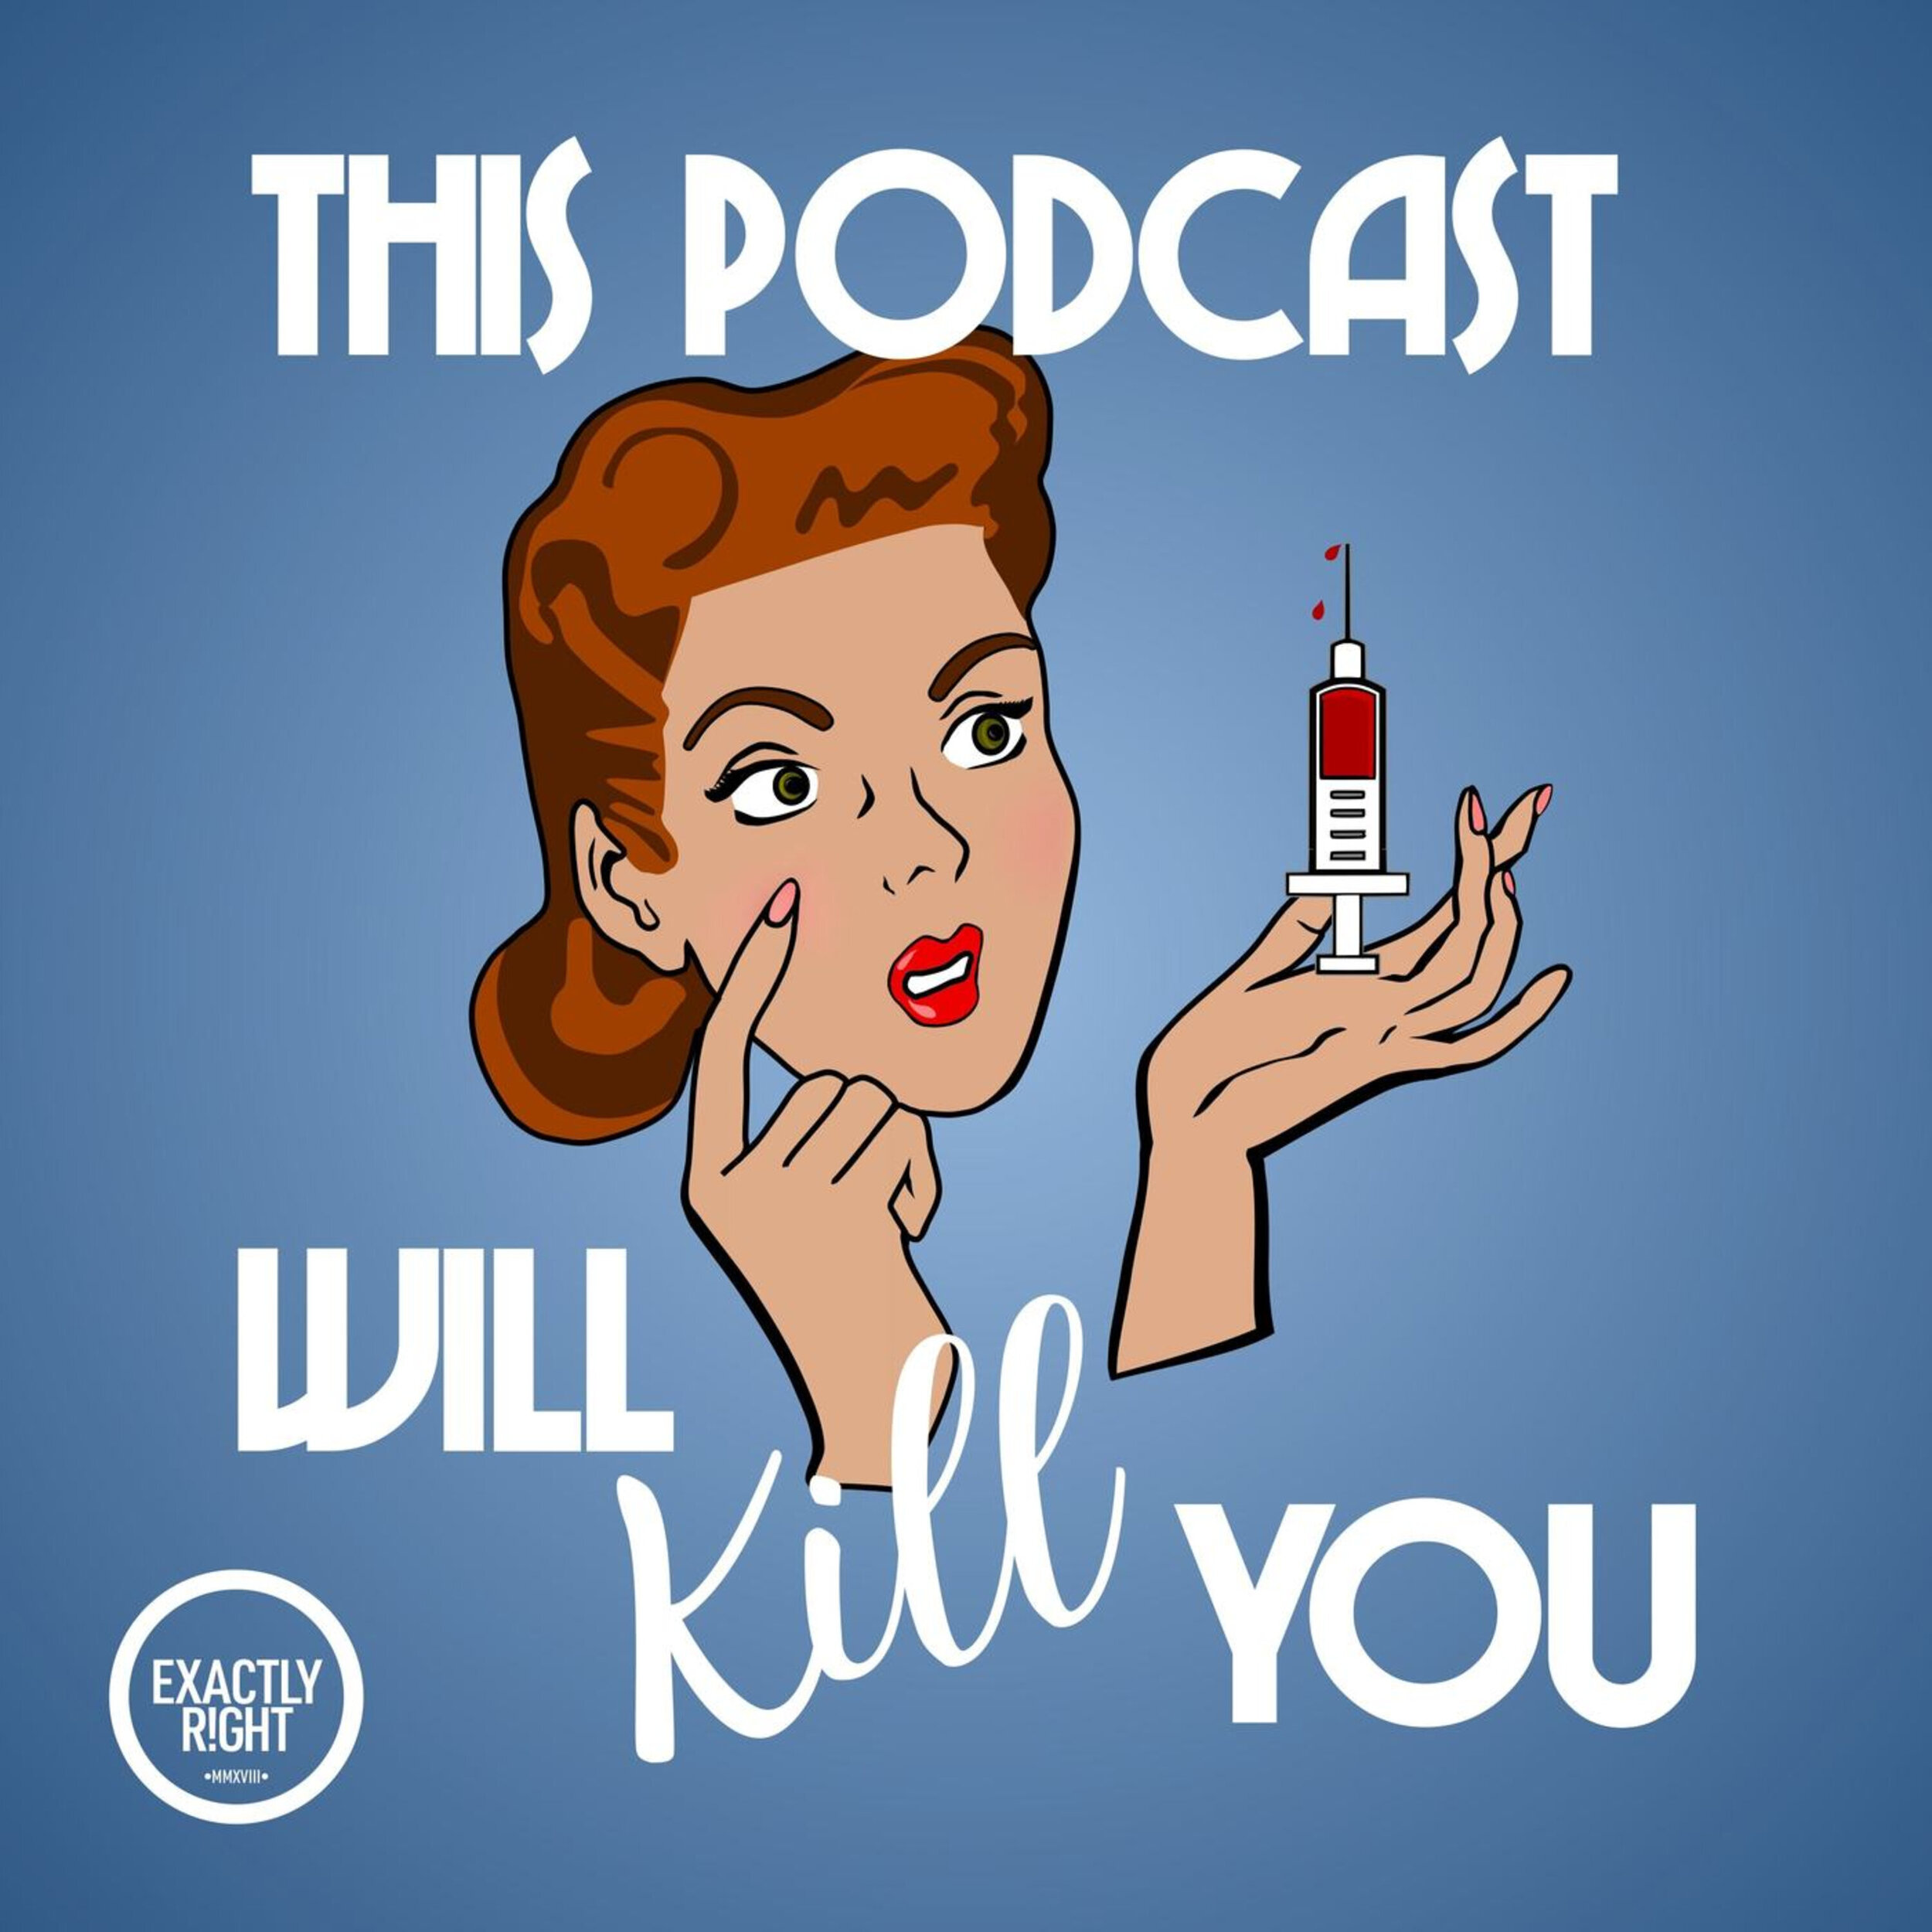 This Podcast Will Kill You: COVID-19